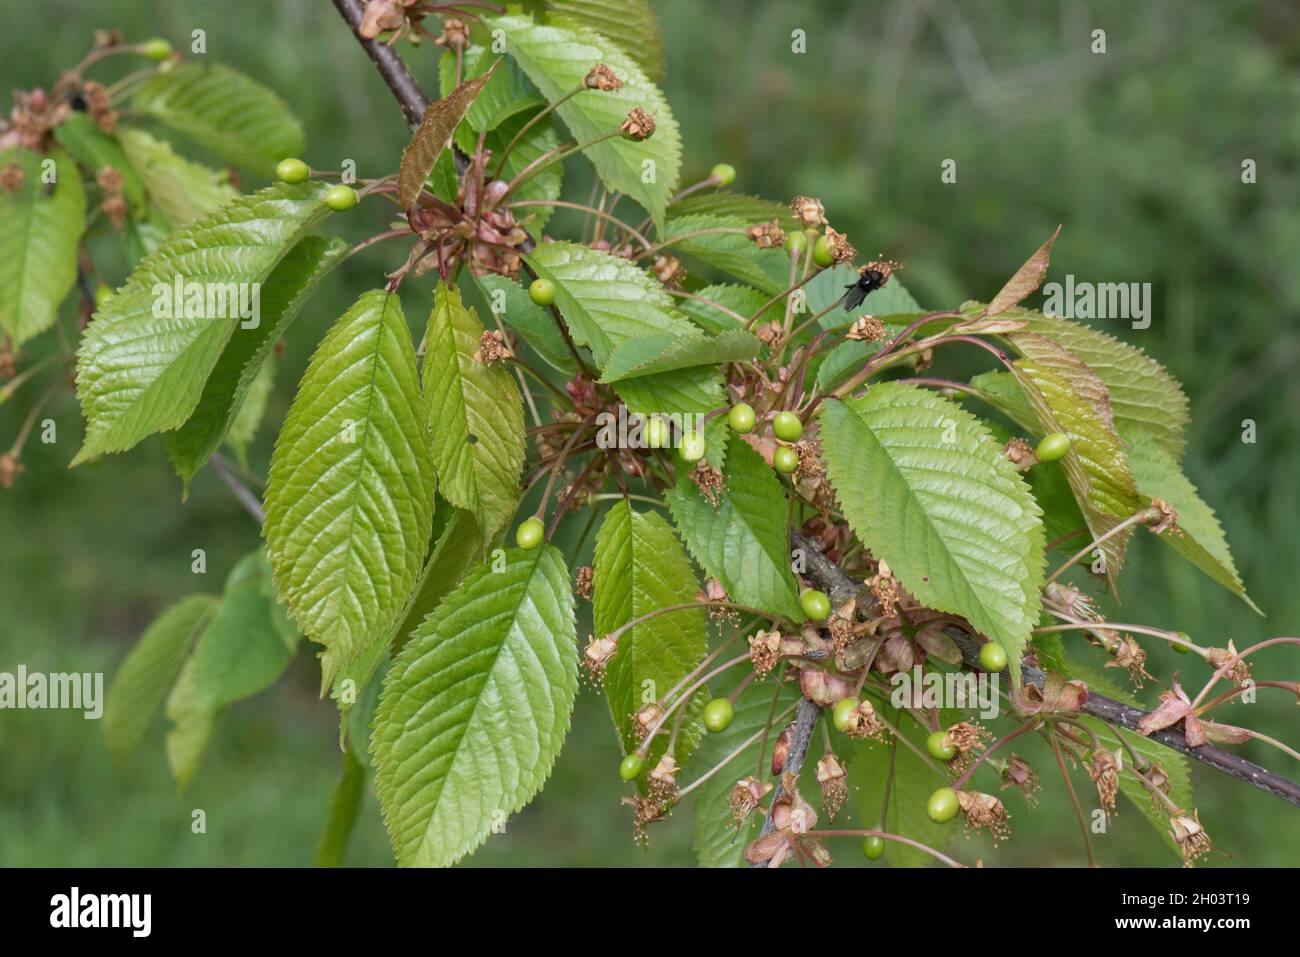 Young fruit or fruitlets of wild cherry (Prunus avium) with mature leaves in spring, Berkshire, April Stock Photo